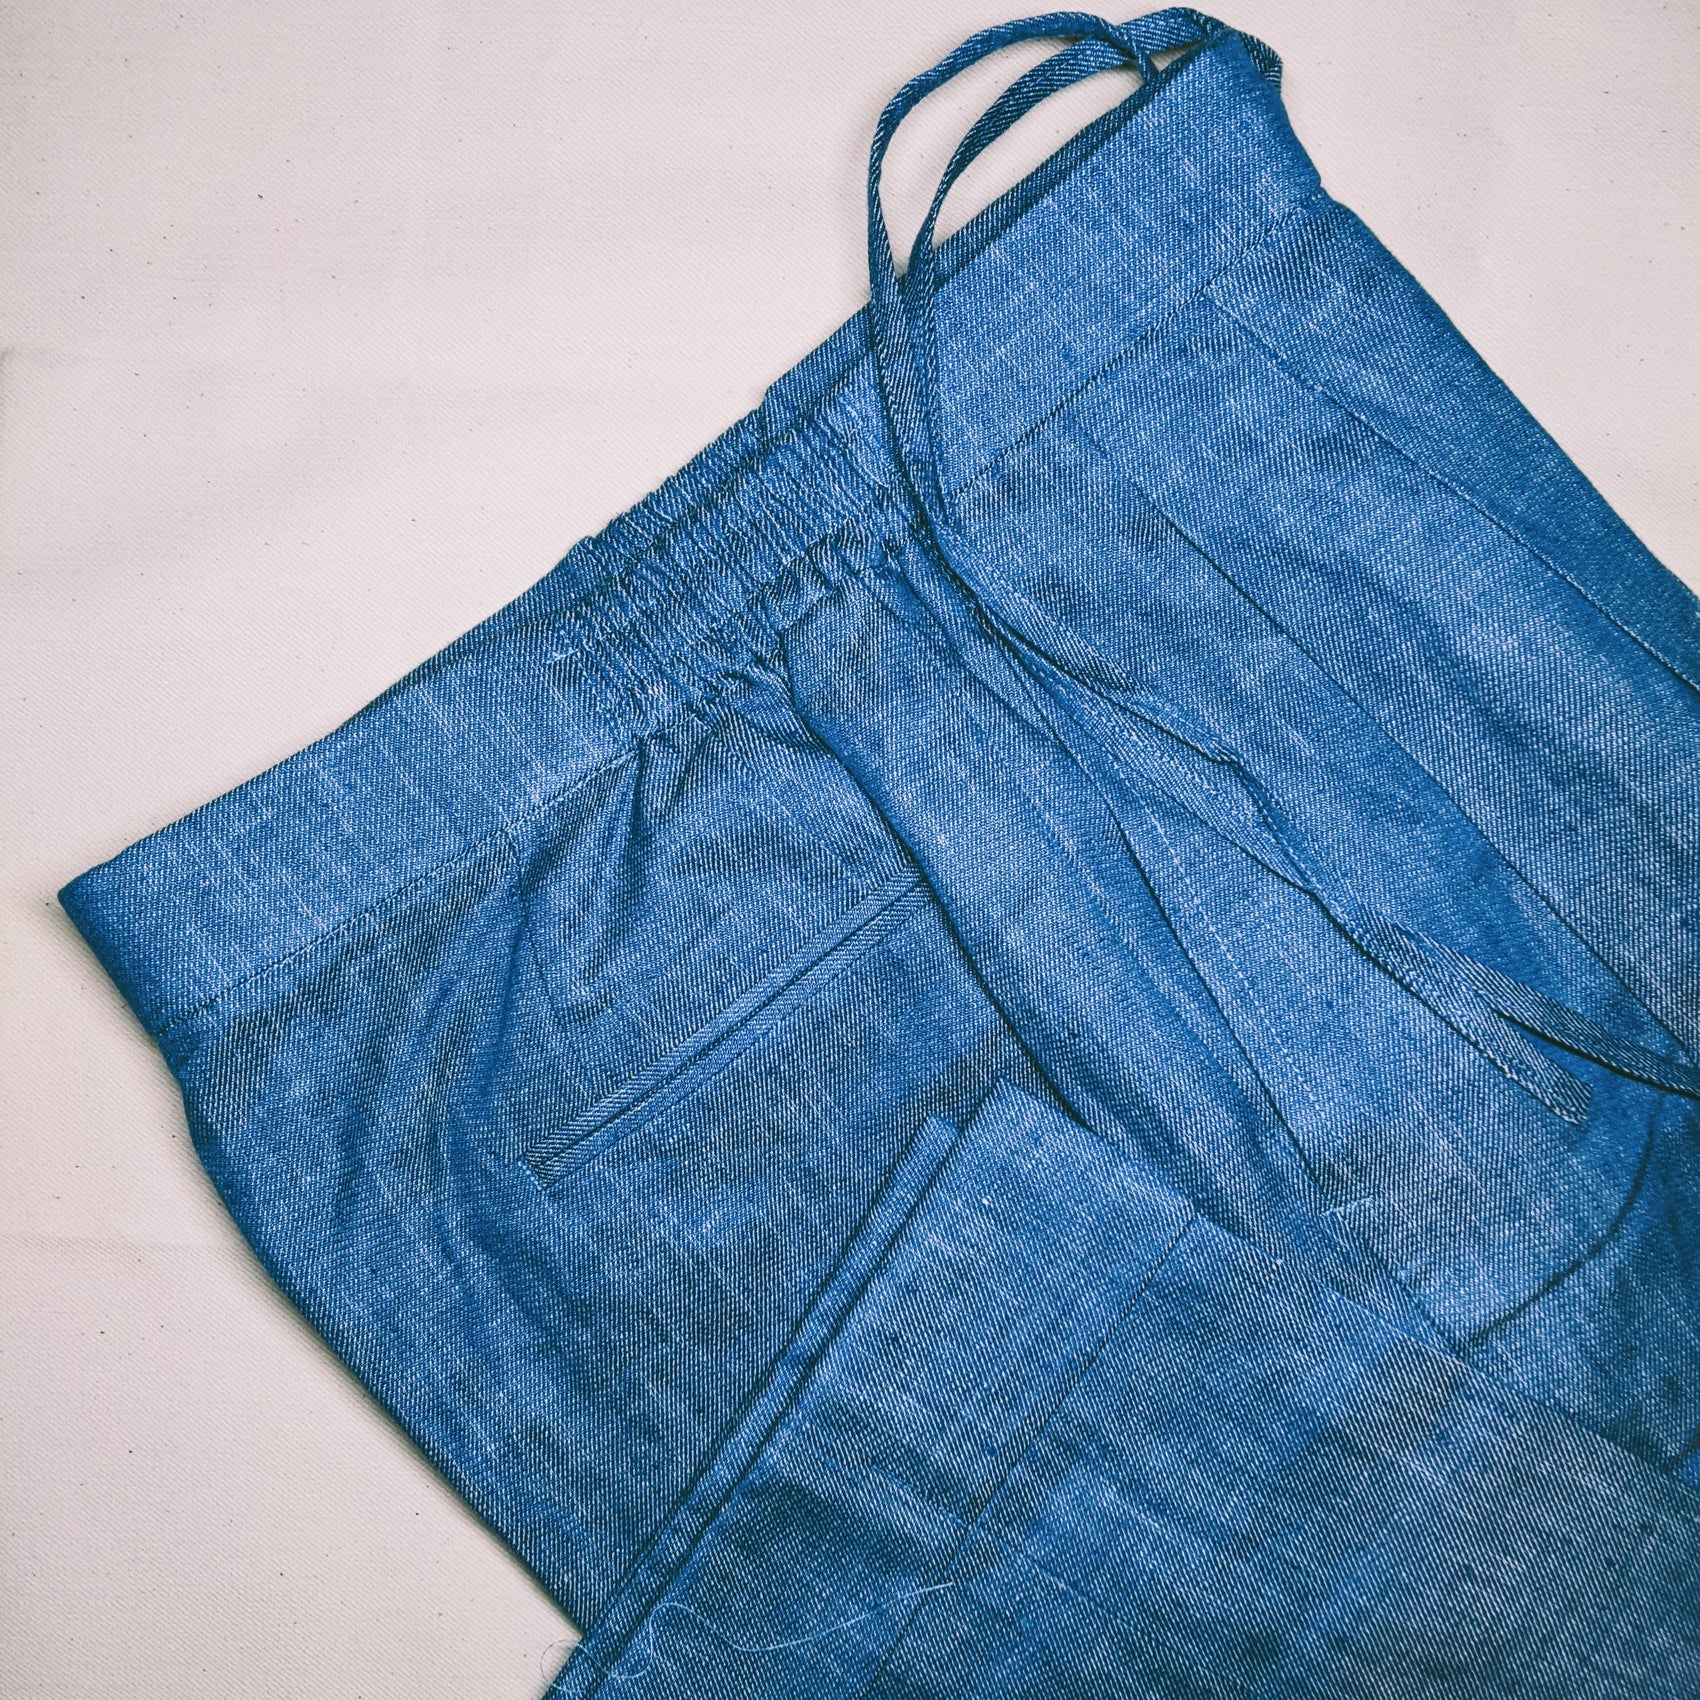 [Sample] Japanese “Washed Denim” Linen Trousers  - ST044